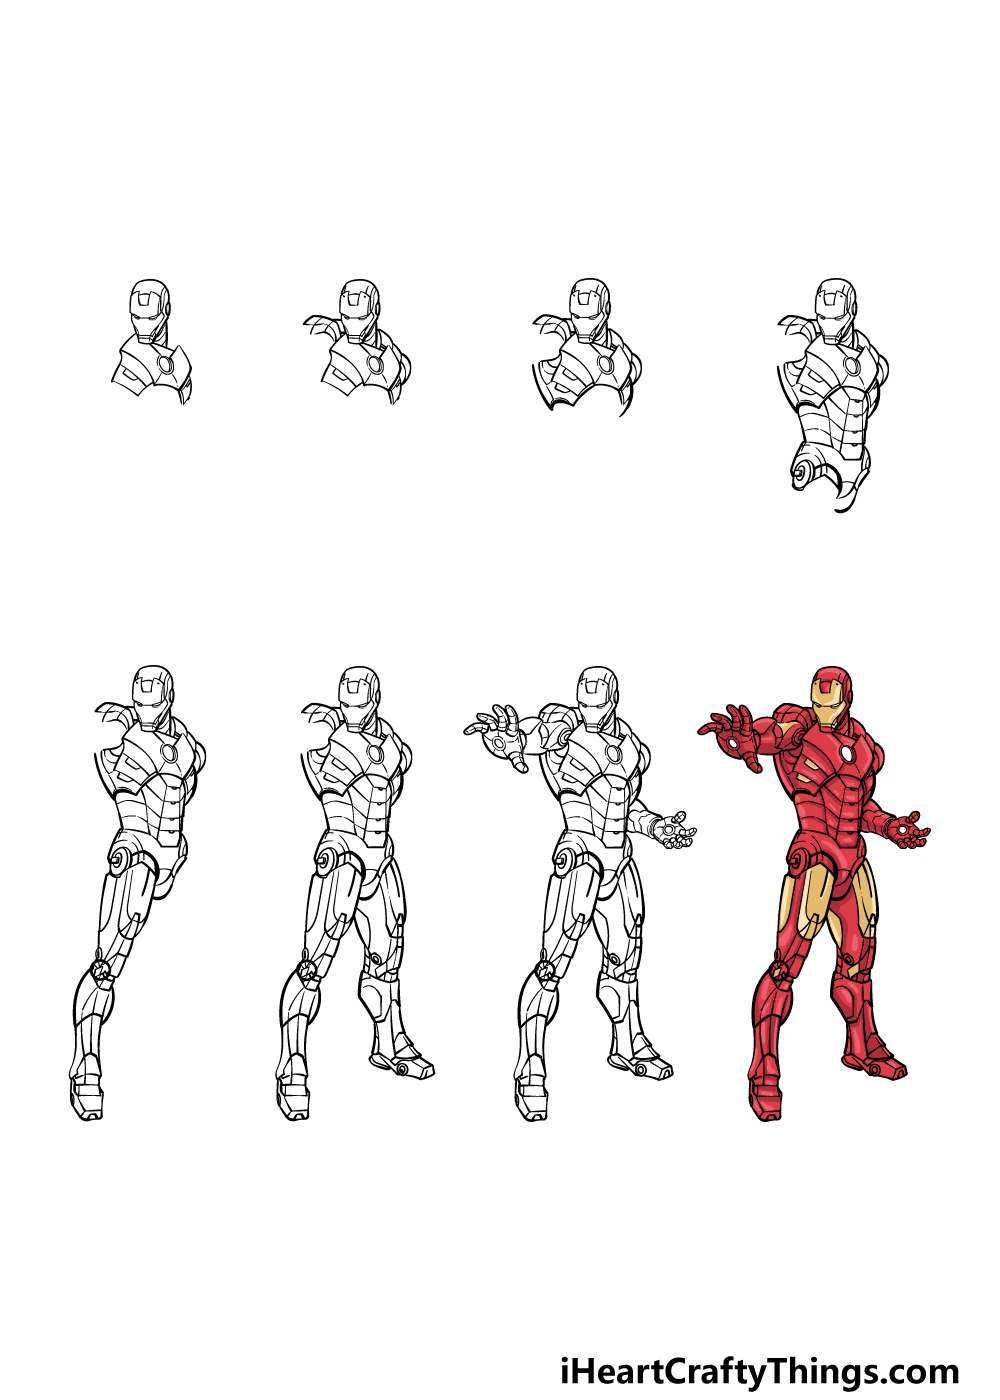 Iron Man Drawing Best - Drawing Skill-anthinhphatland.vn